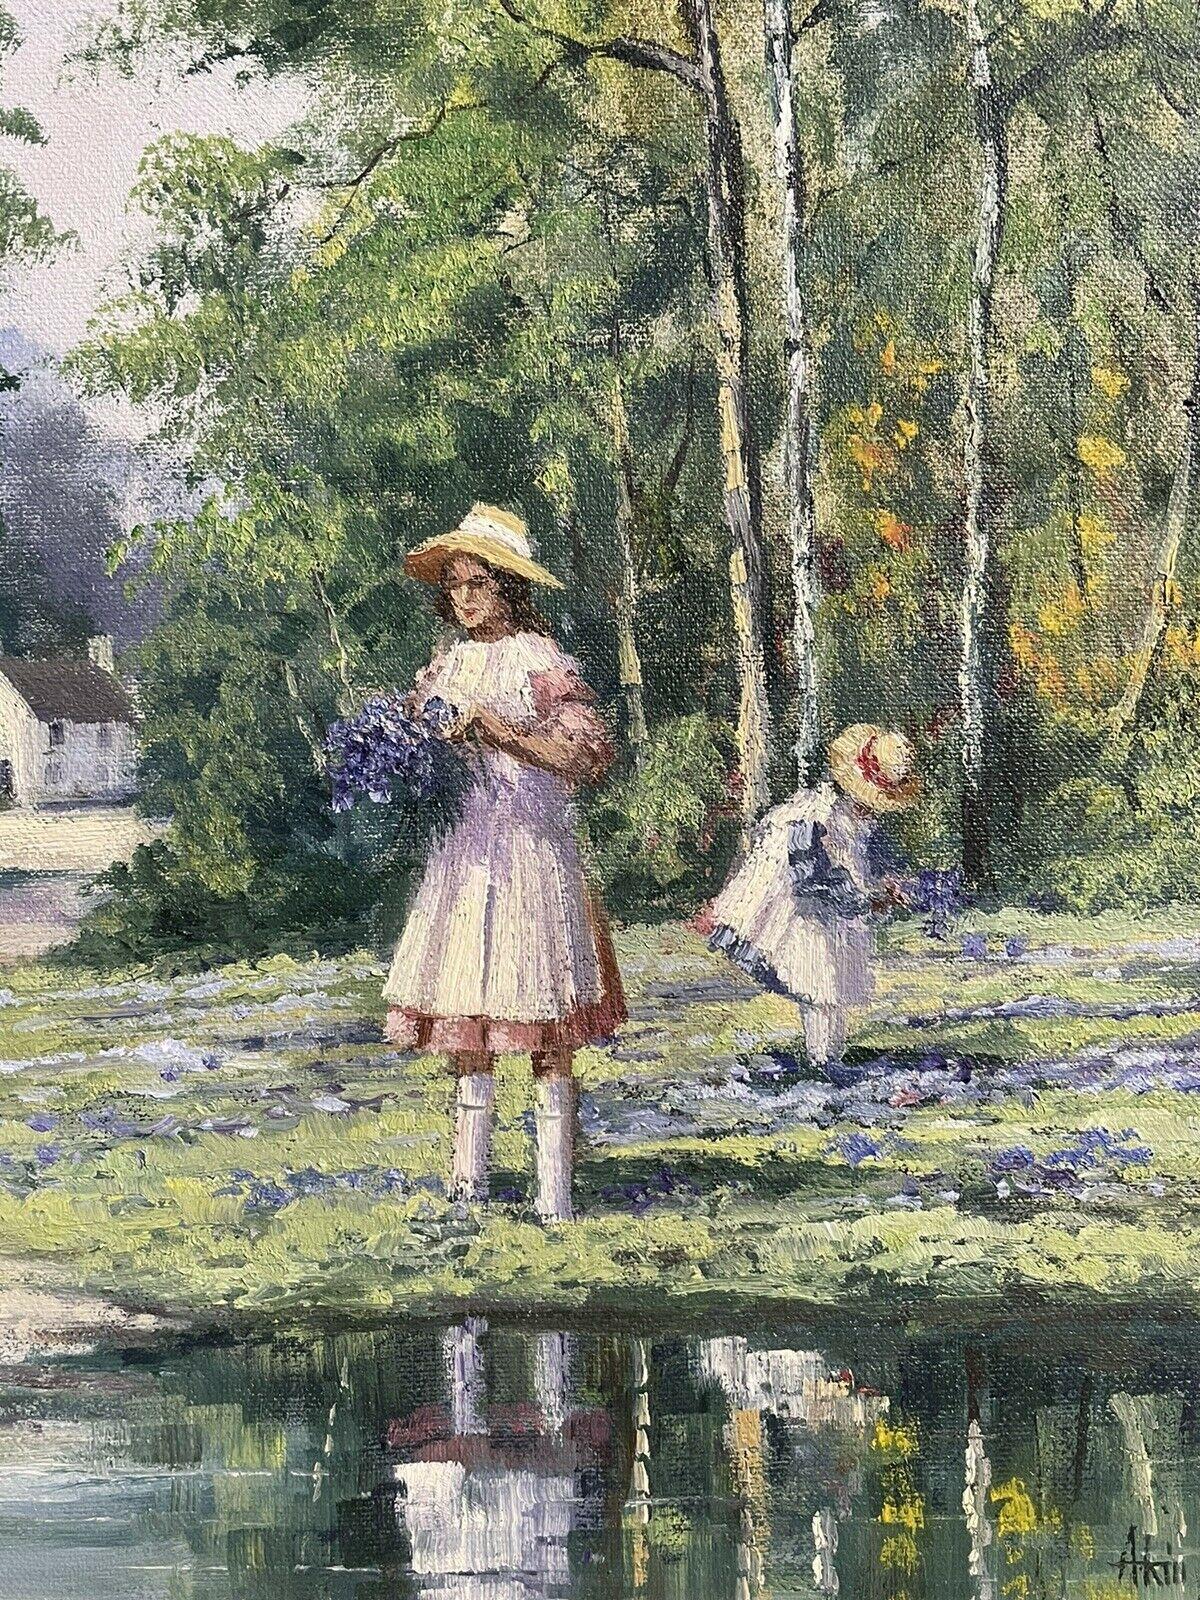 ALAN KING - ORIGINAL OIL PAINTING - CHILDREN GATHERING BLUEBELLS BY STREAM - Gray Figurative Painting by Alan King